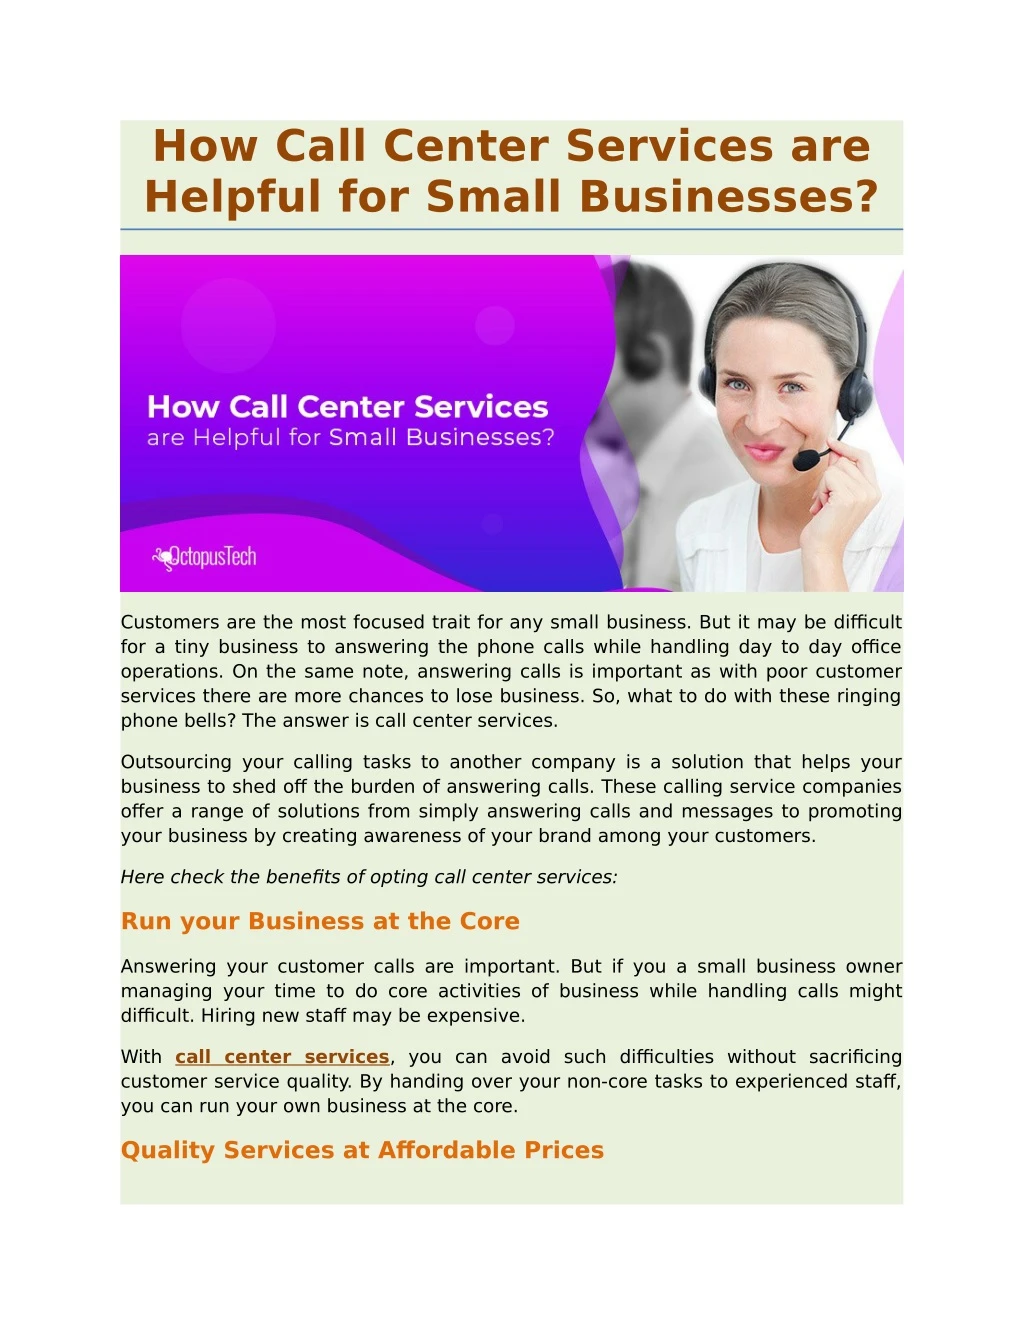 how call center services are helpful for small